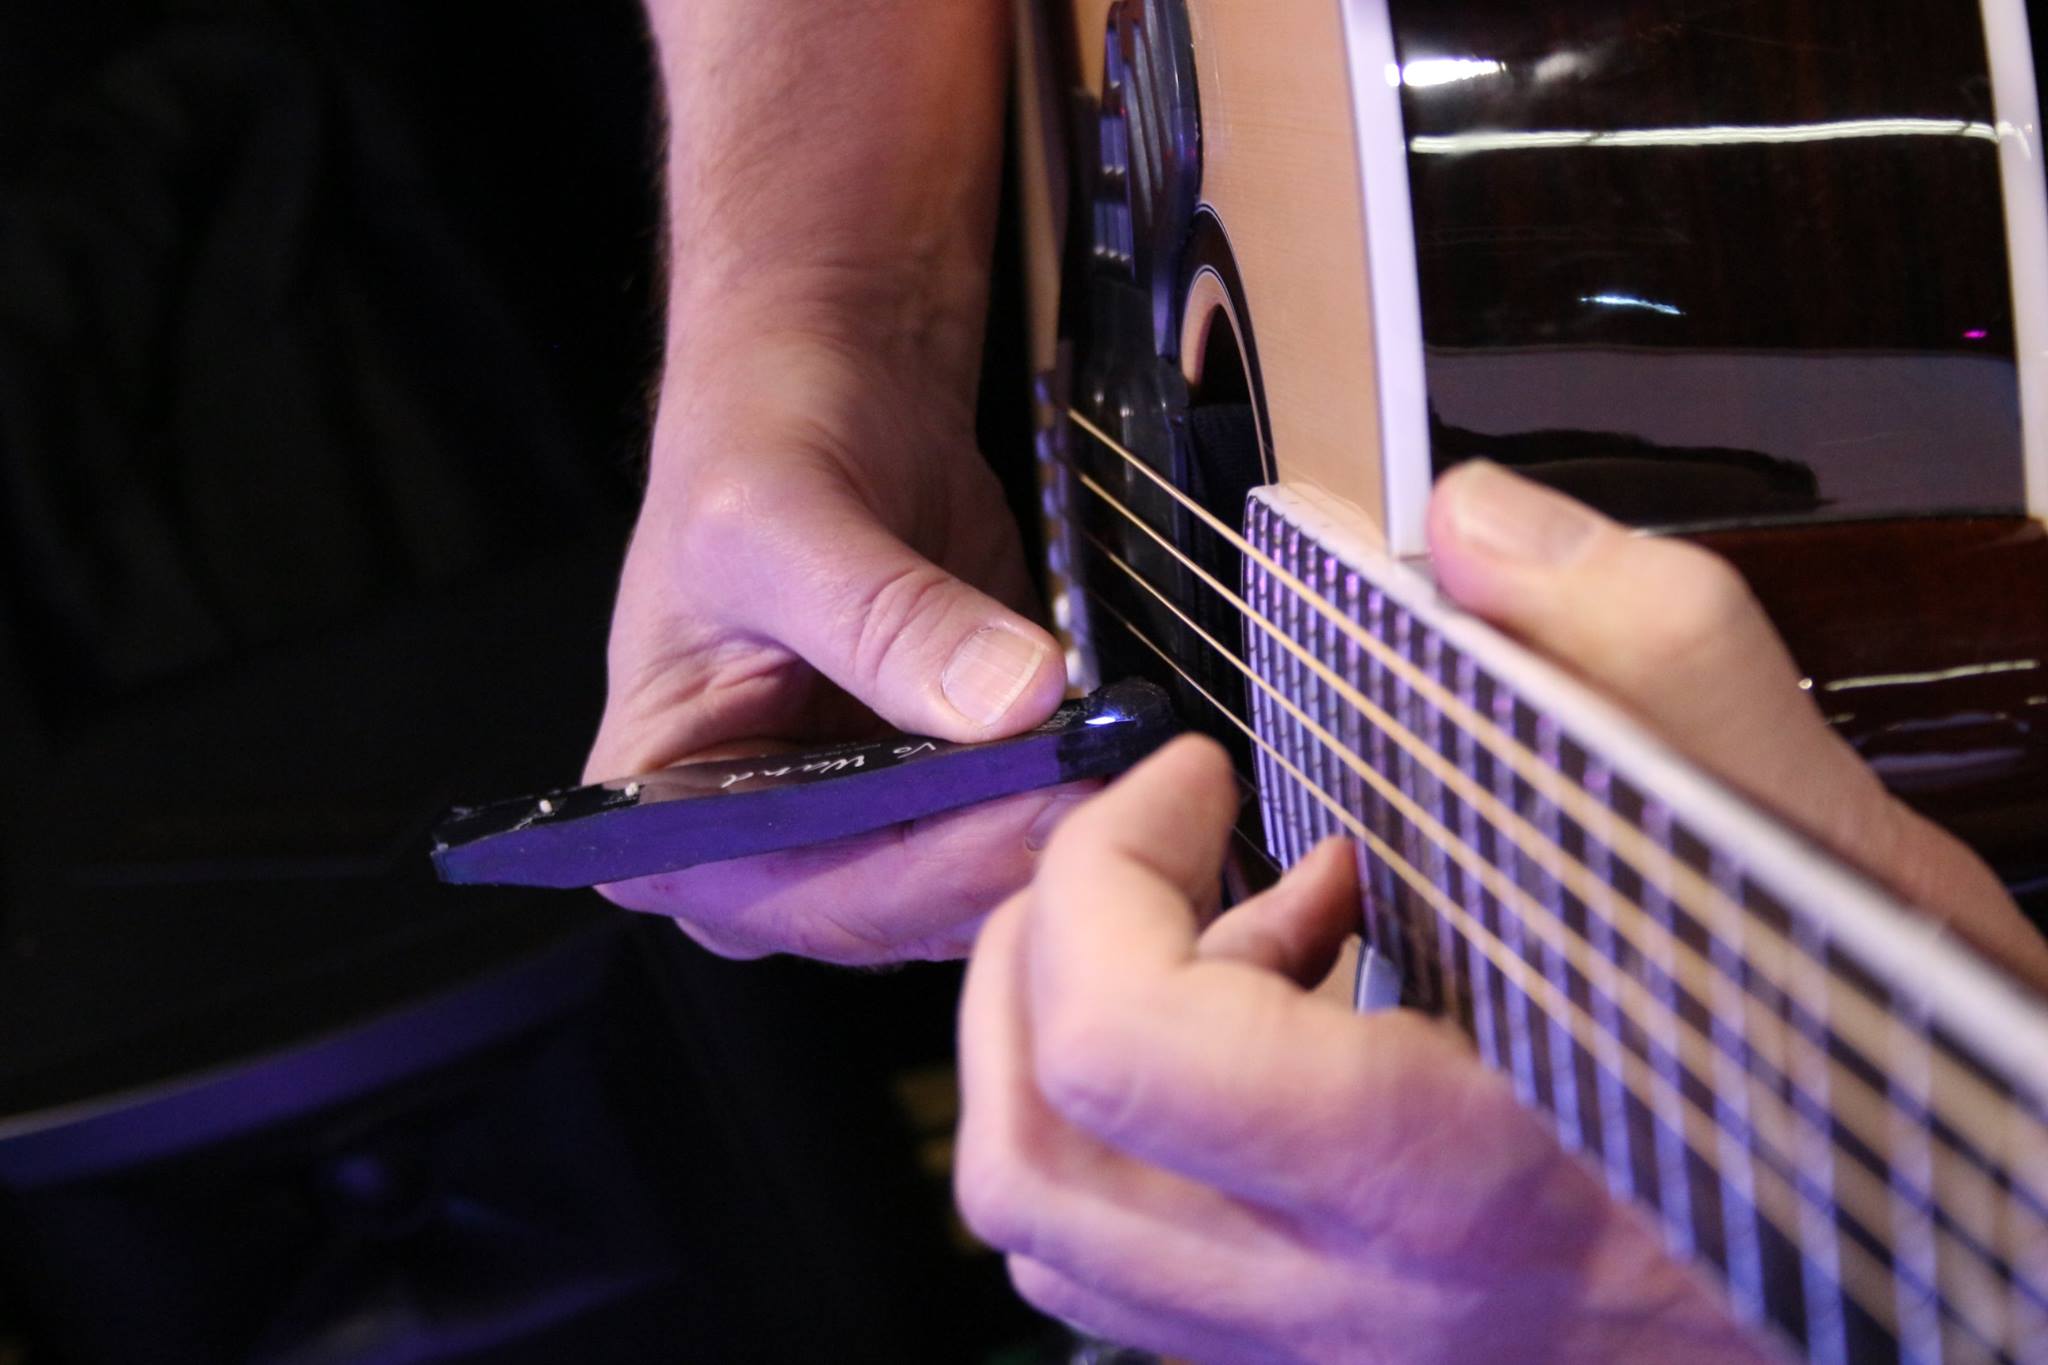 Paul Vo’s Physics Defying Wand Makes Guitars Sound Entirely Different